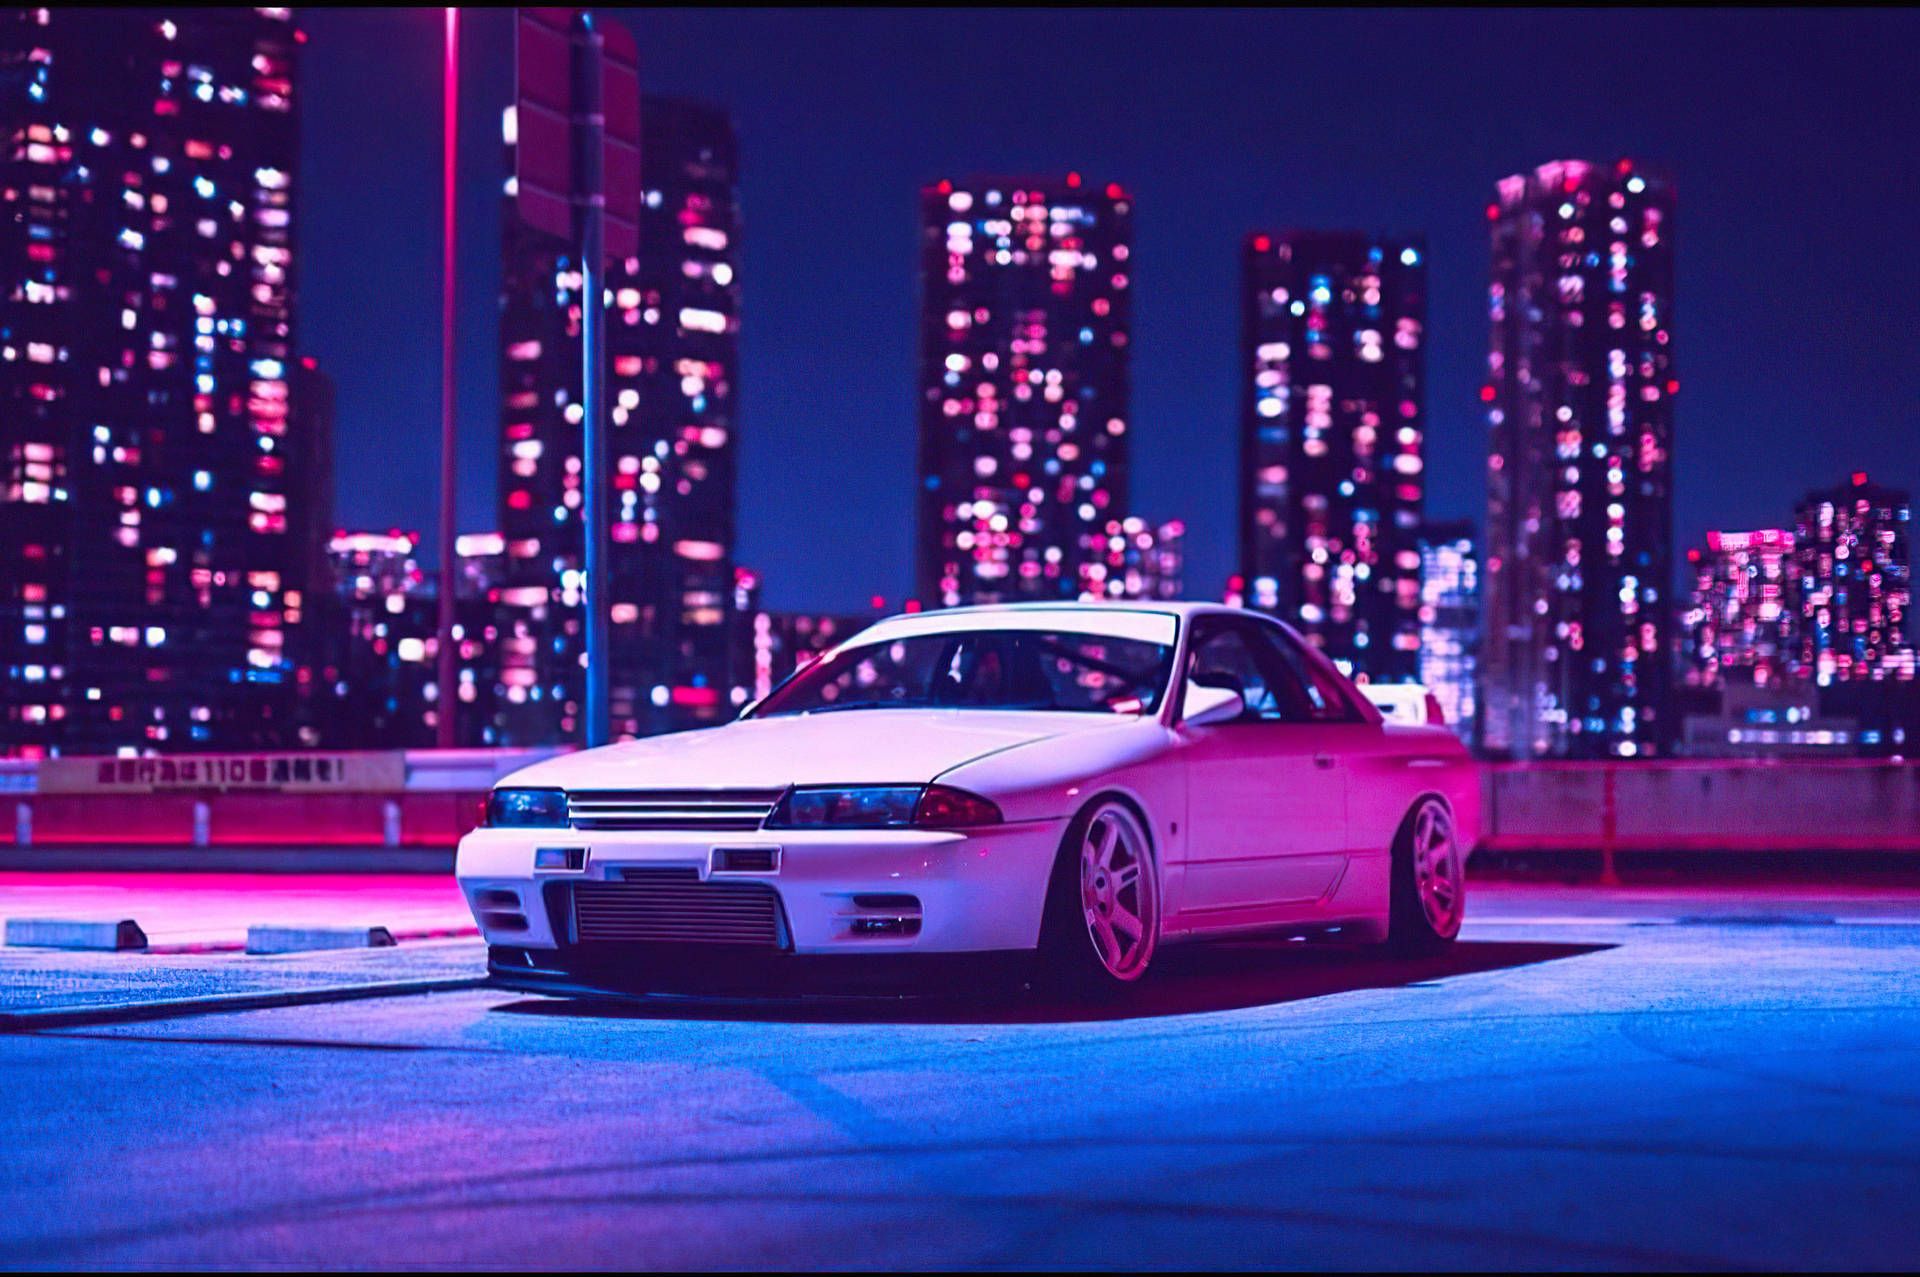 Parked Car And Neon Lights Wallpaper